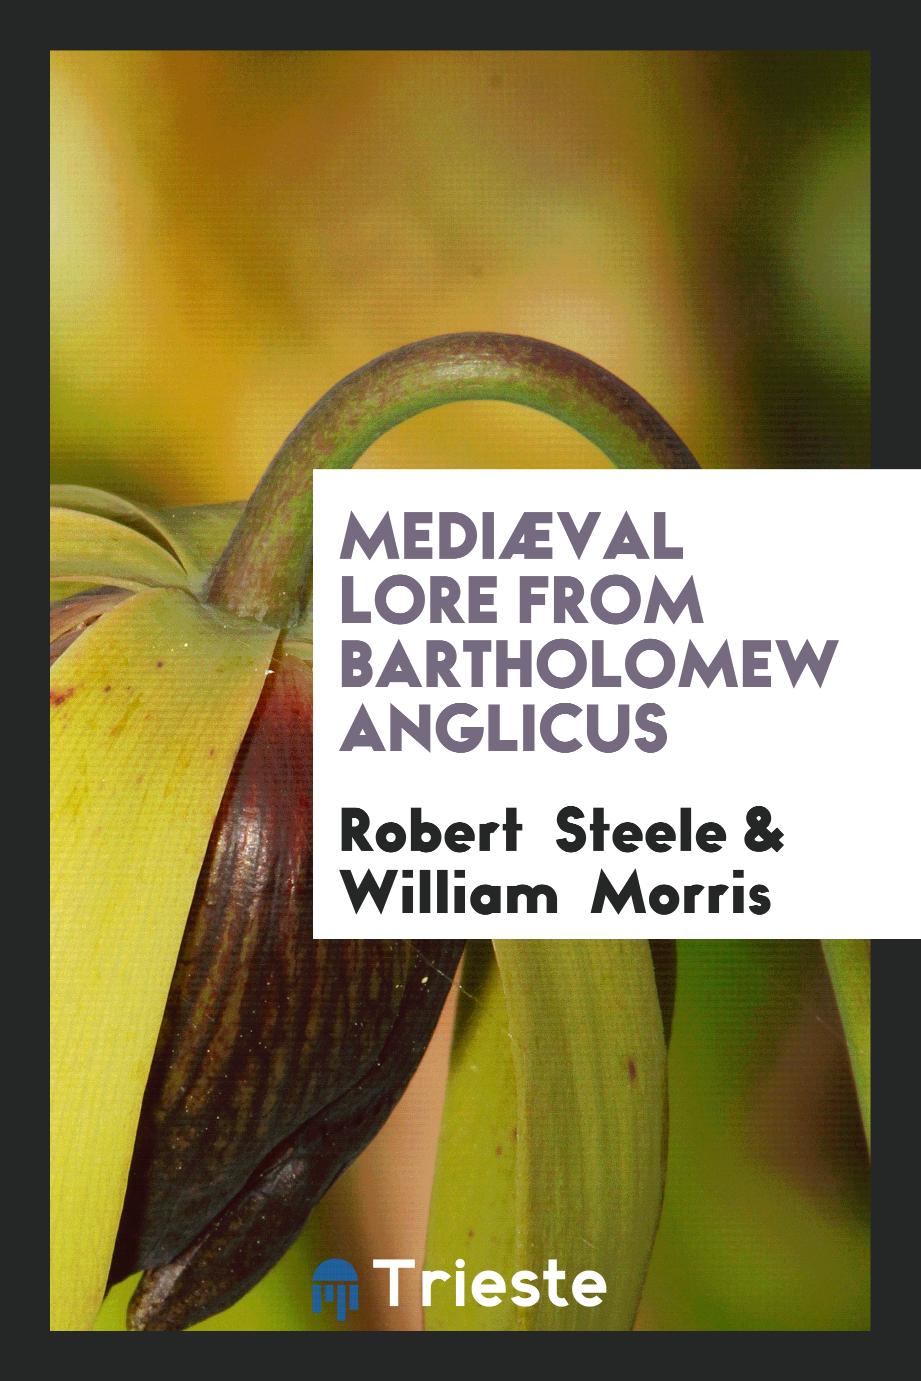 Mediæval Lore from Bartholomew Anglicus